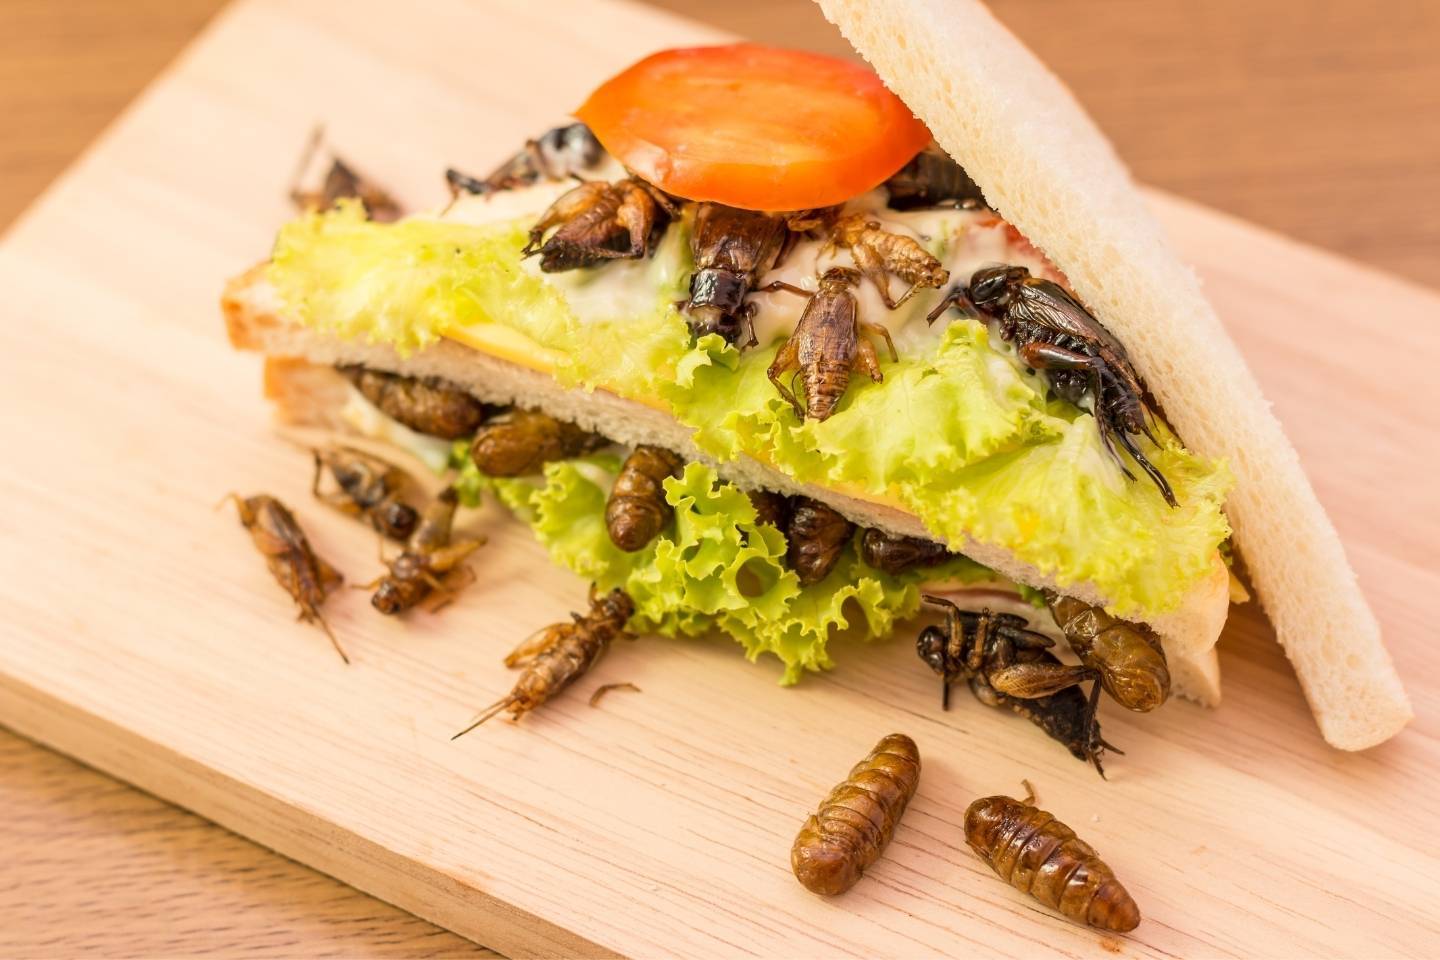 Insect sandwhich